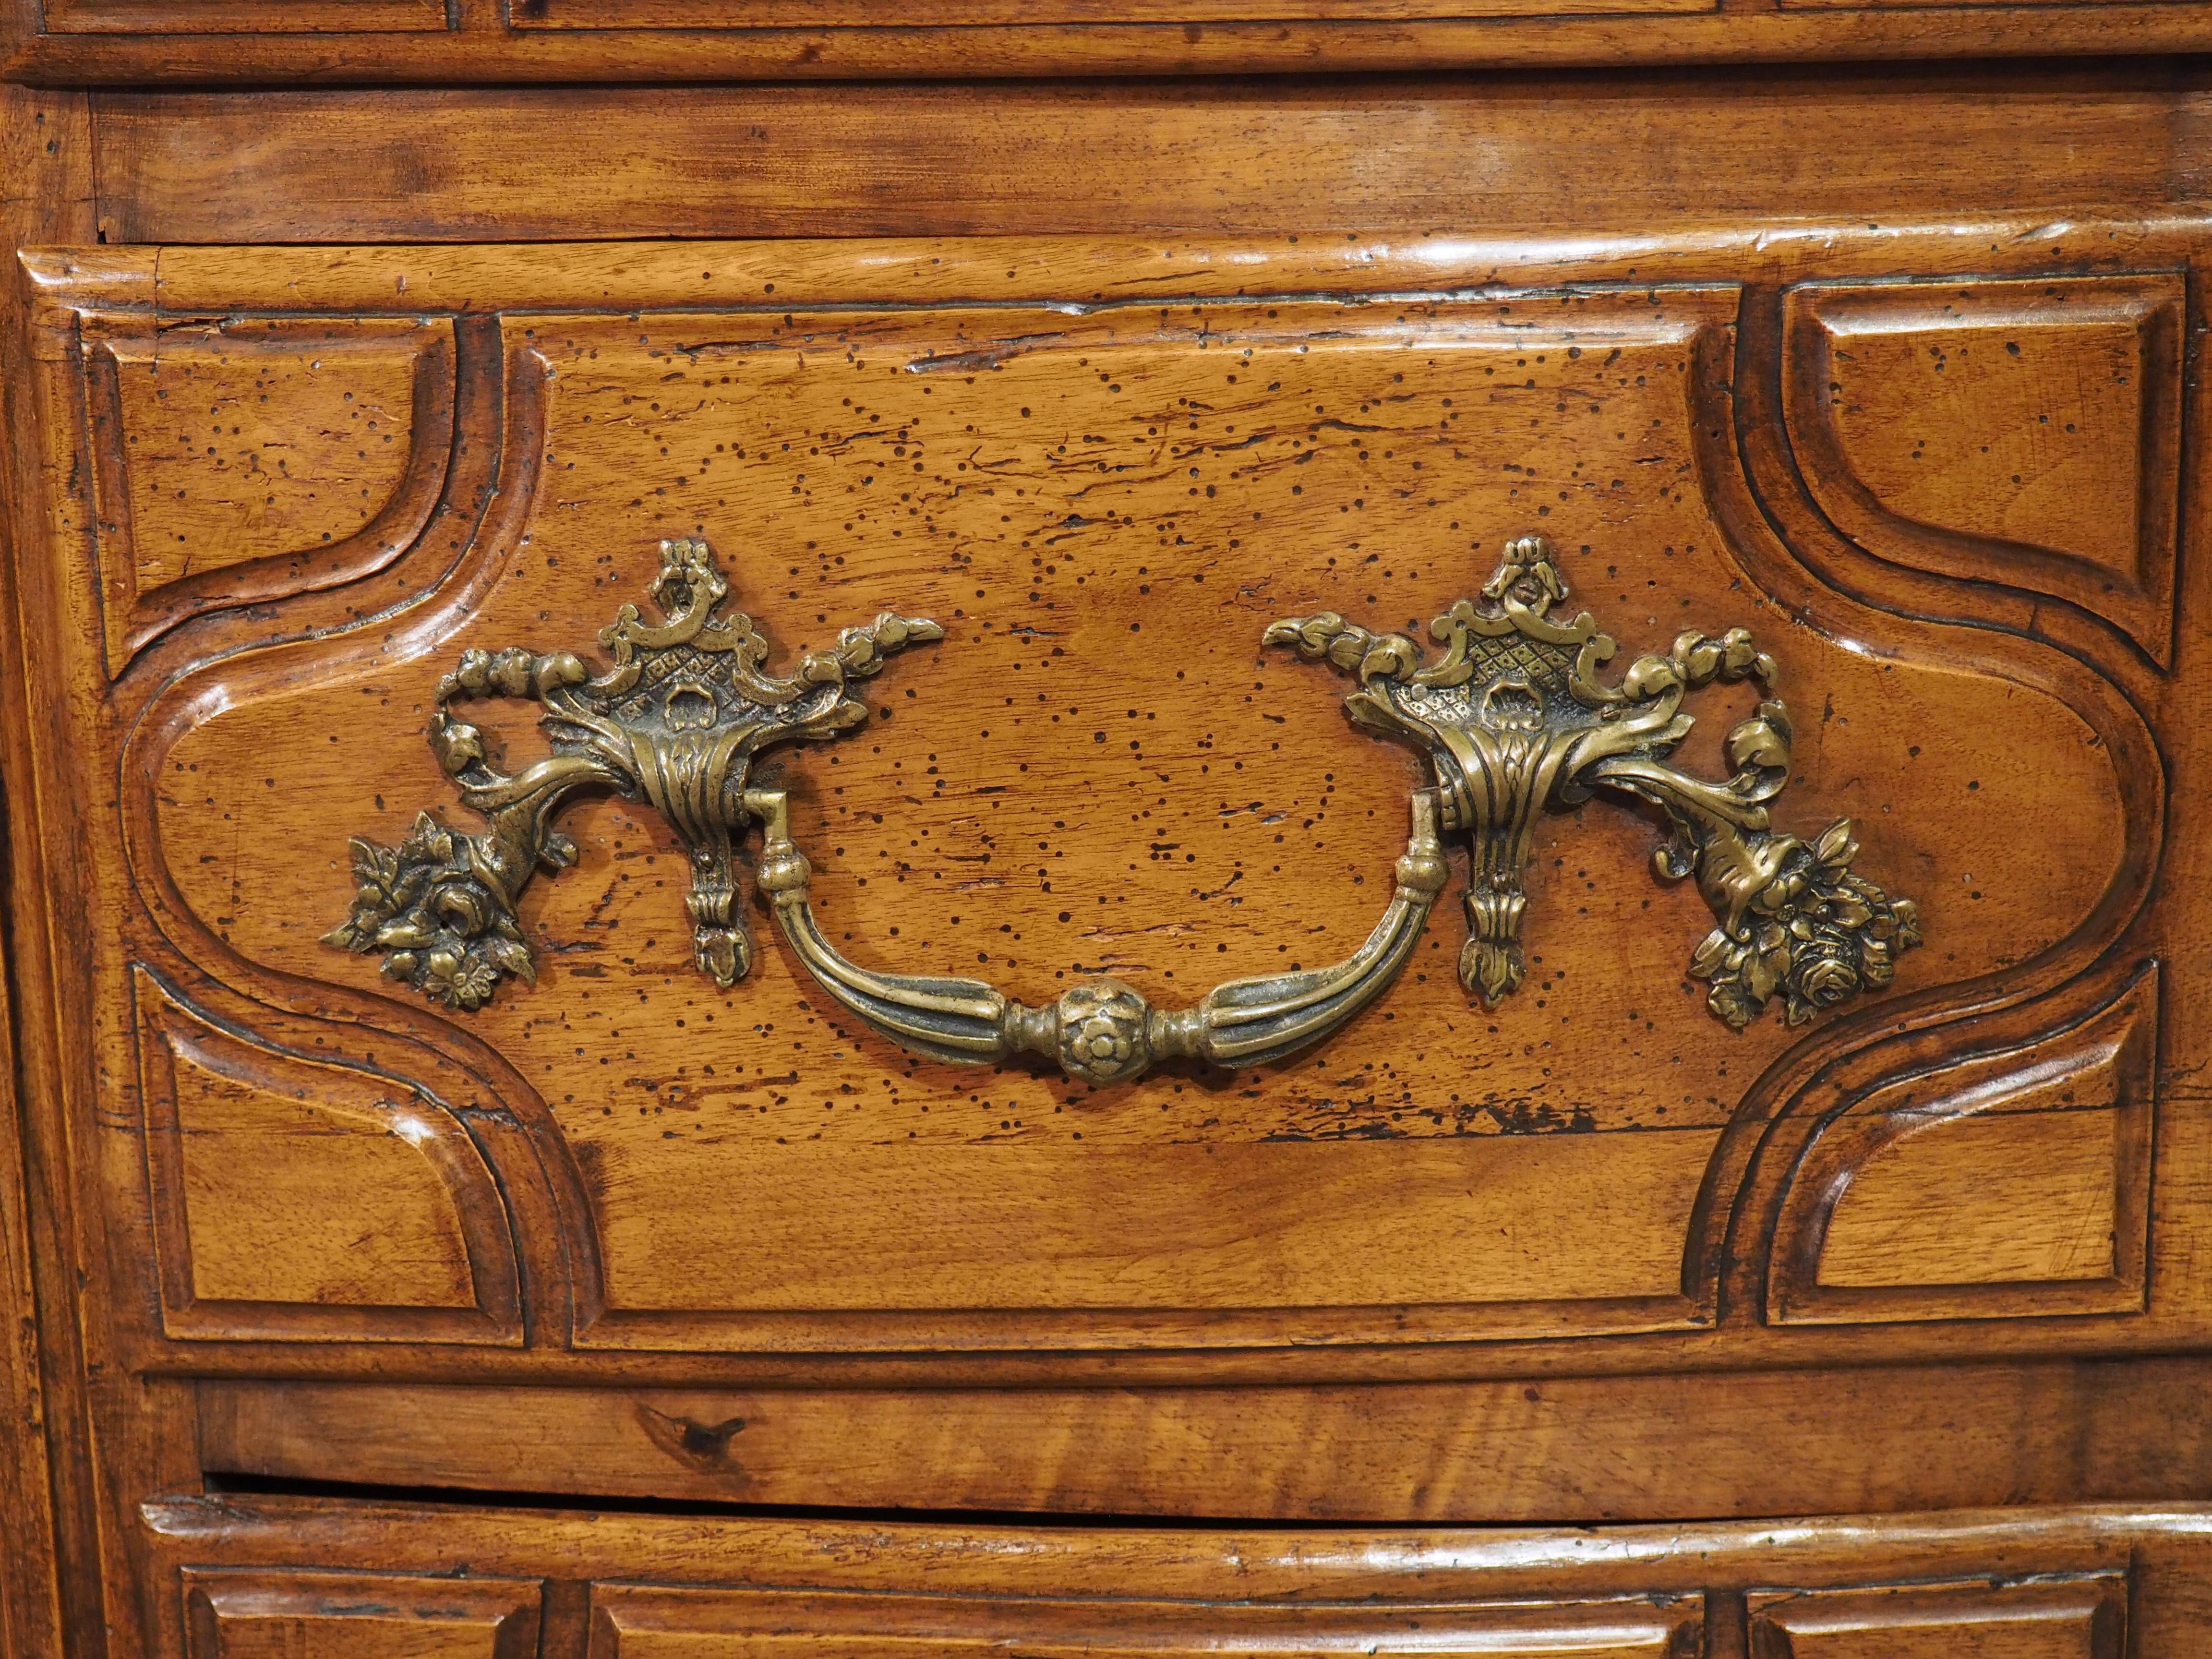 Hand-Carved Rare 18th Century Walnut Wood Commode from the Île-de-France Region